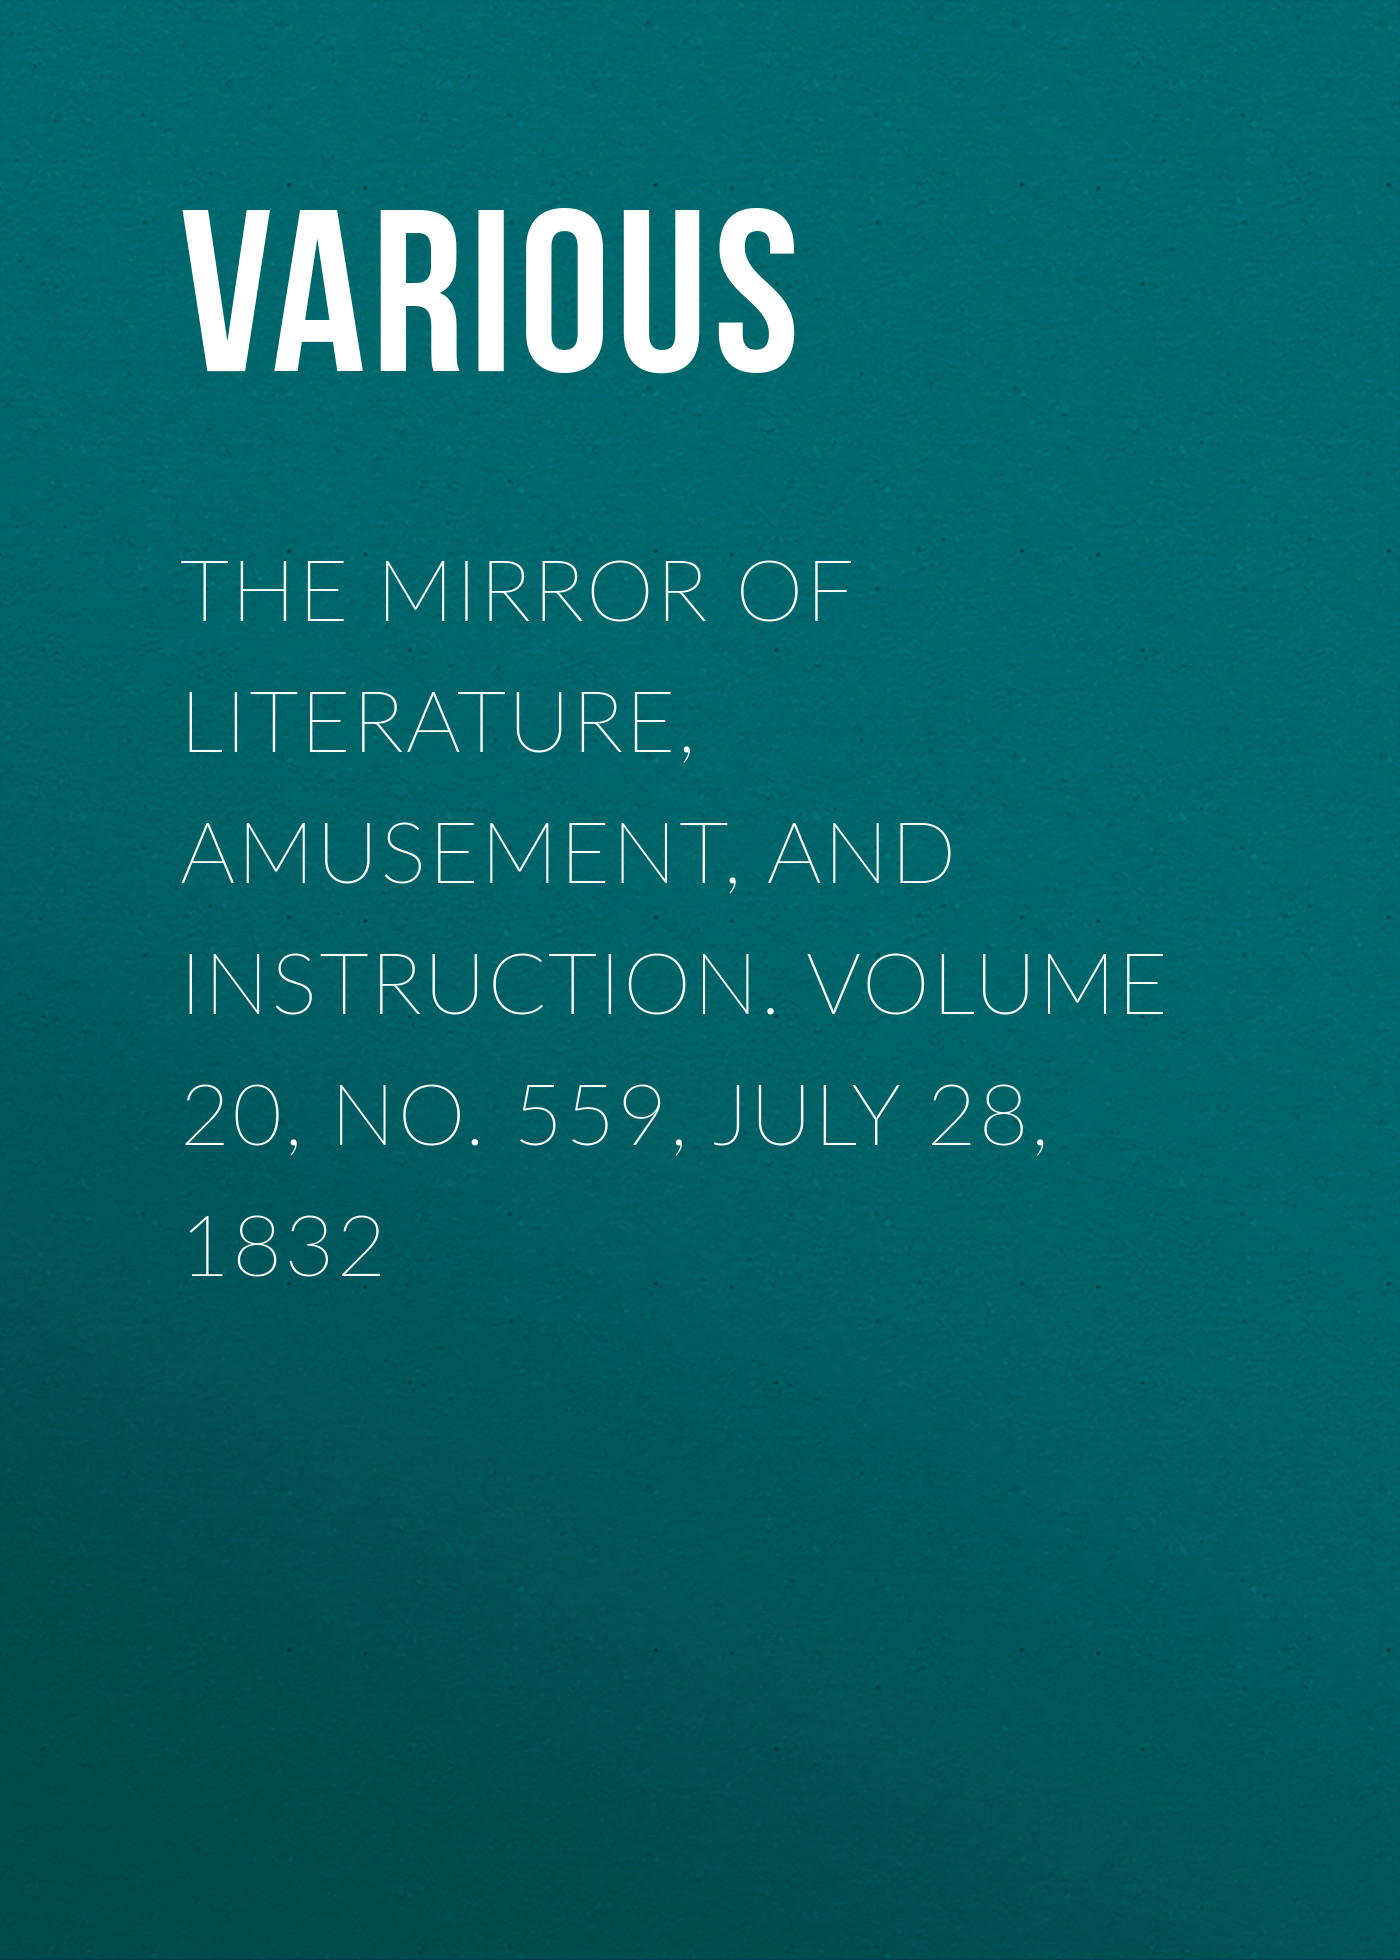 Various The Mirror of Literature, Amusement, and Instruction. Volume 20, No. 559, July 28, 1832